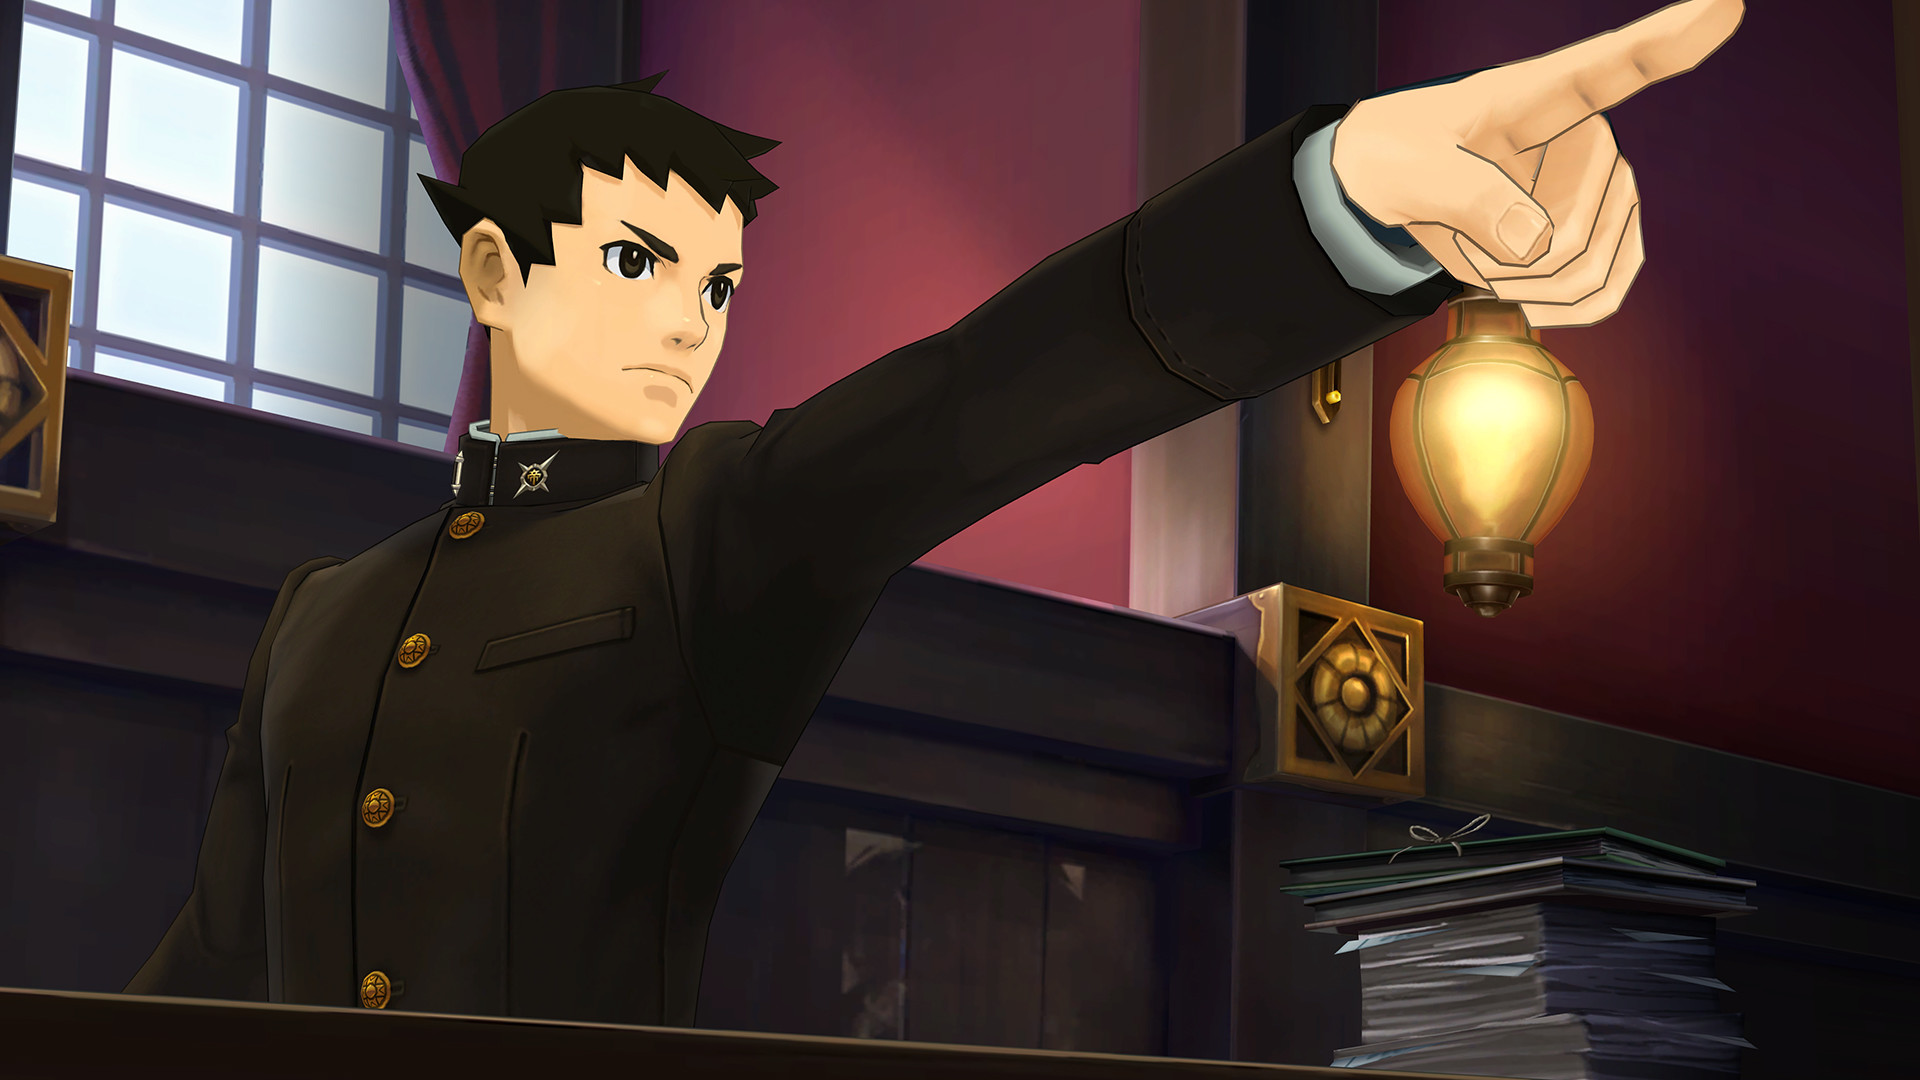 A screenshot of the main character from the Great Ace Attorney chronicles standing in court pointing like Phoenix Wright